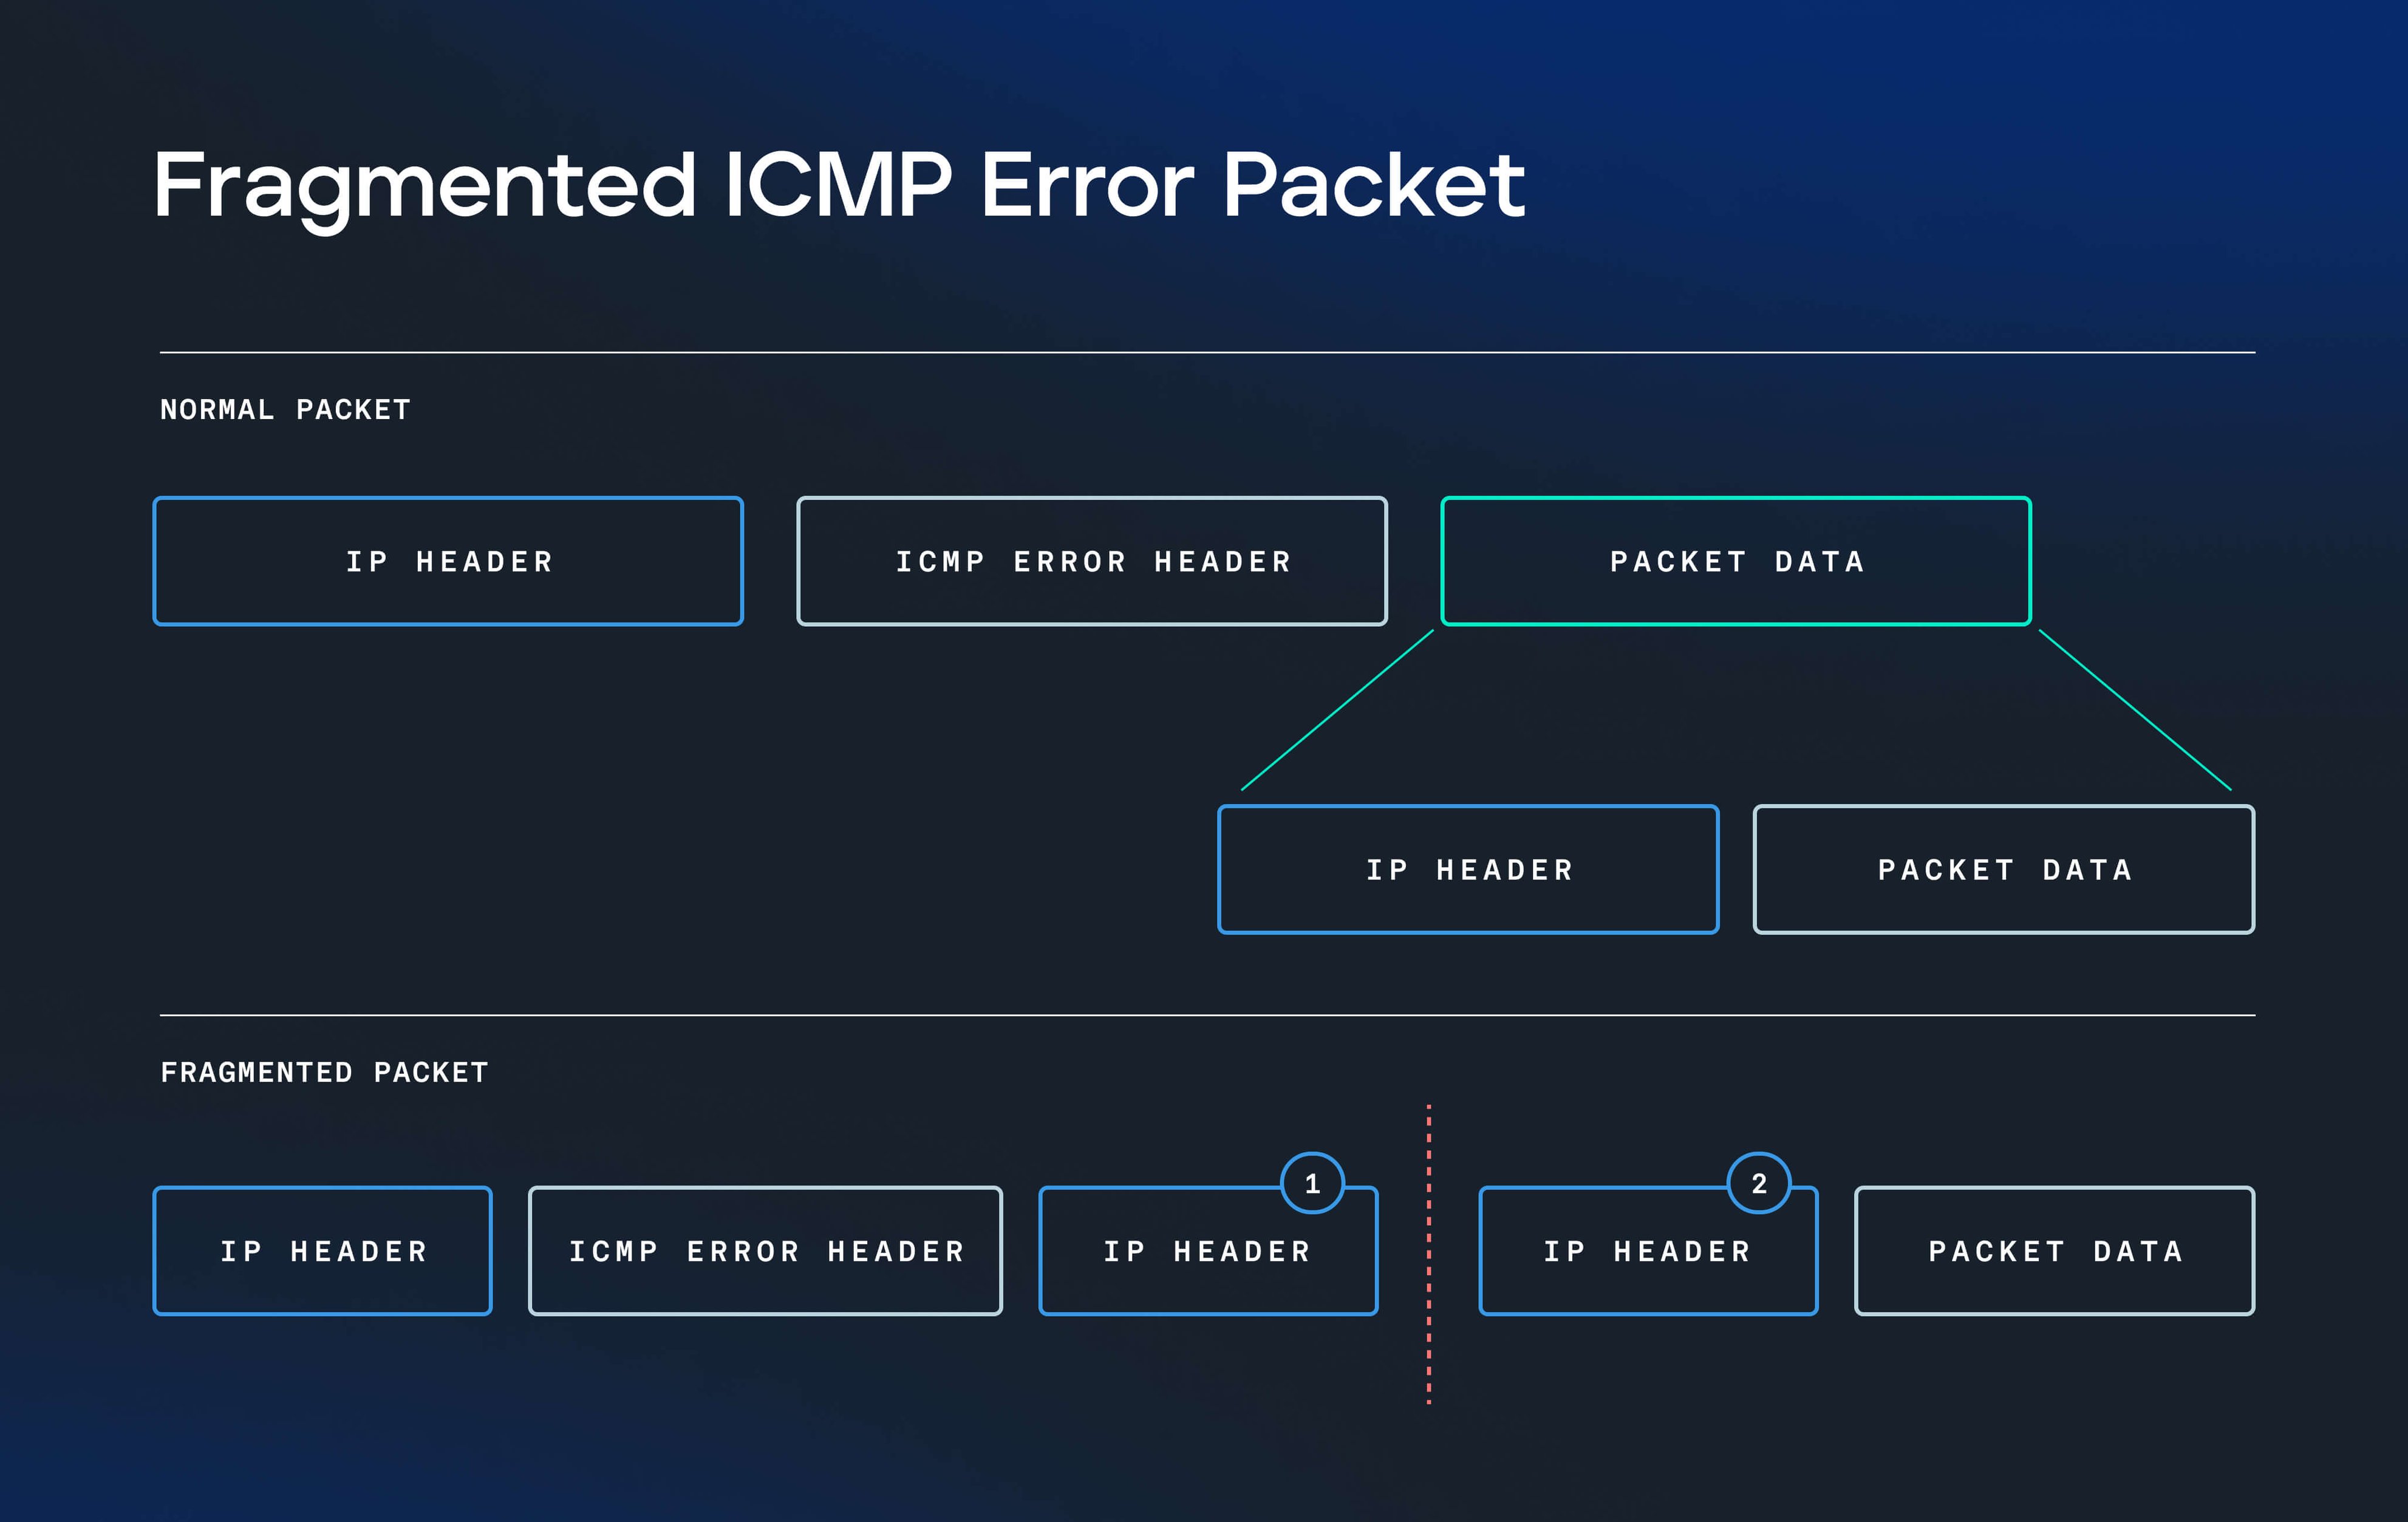 Figure 3 Fragmented ICMP Error Packet